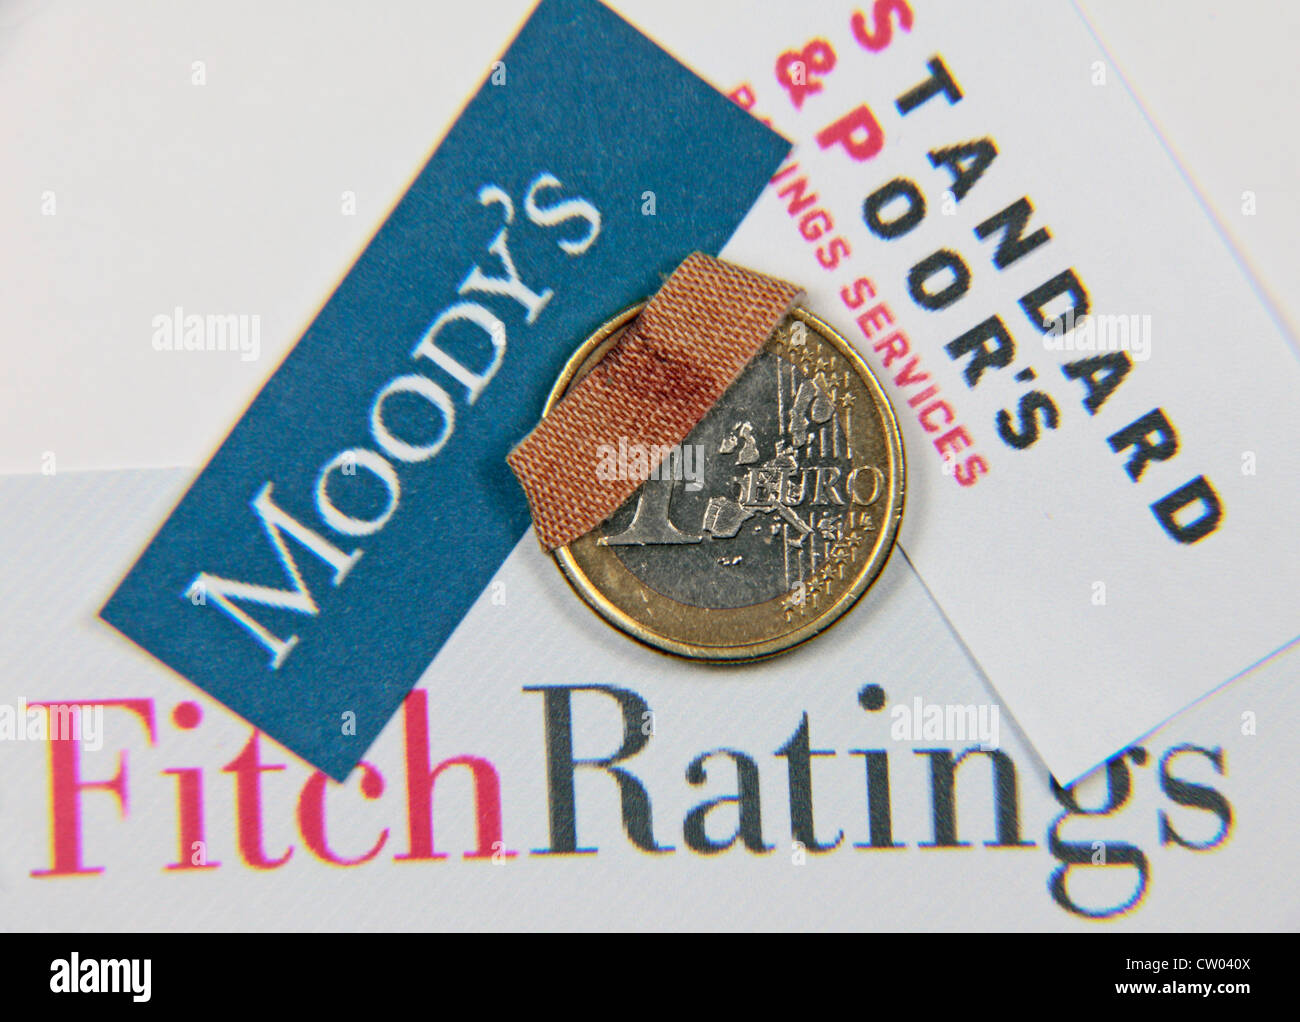 An 'injured' or 'damaged' or 'wounded' one Euro coin with the logos for the three credit rating agencies behind. Stock Photo